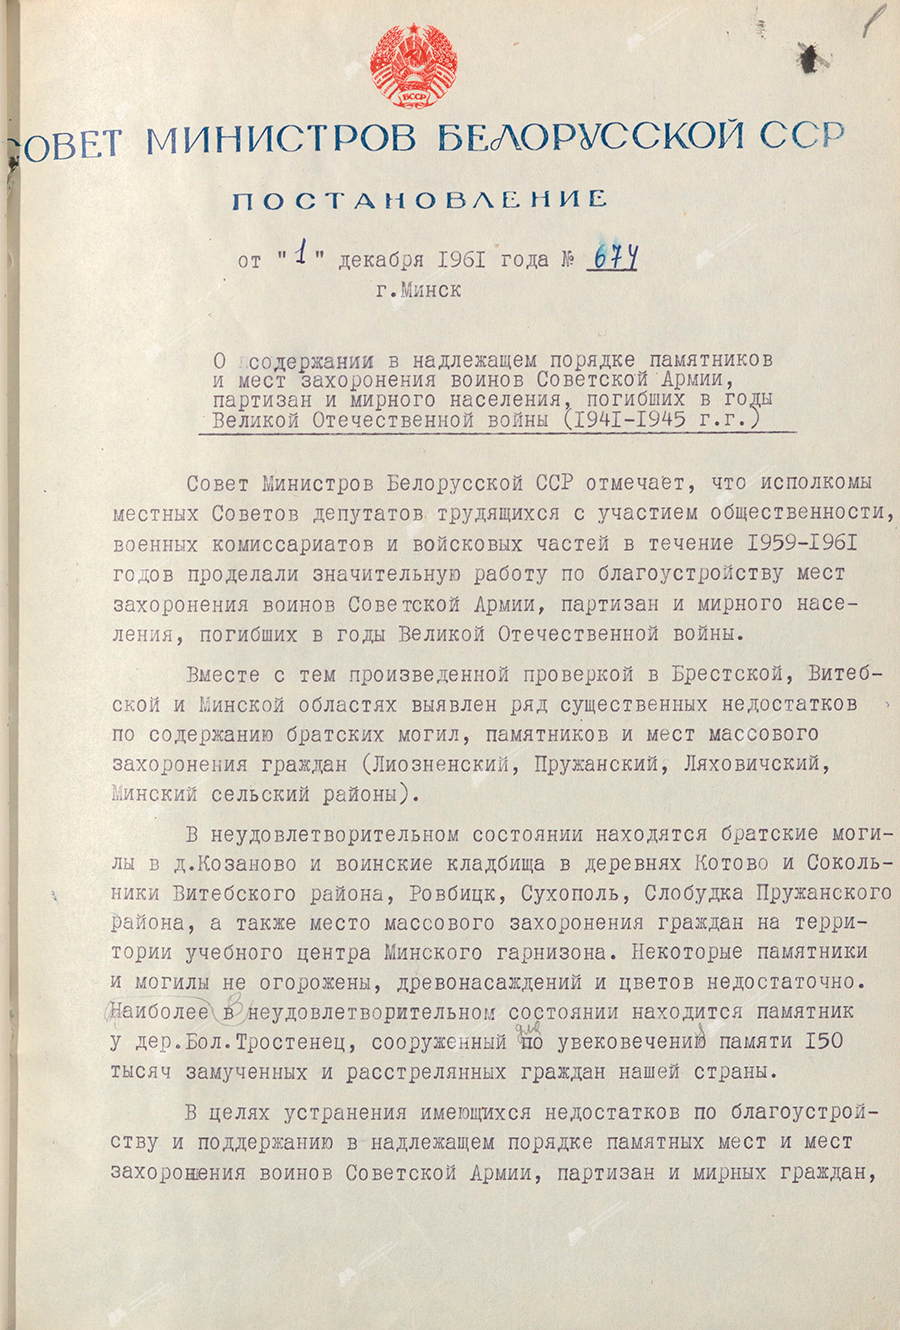 Resolution No. 674 of the Council of Ministers of the BSSR «On the proper maintenance of monuments and burial places of soldiers of the Soviet Army, partisans and civilians who died during the Great Patriotic War (1941 – 1945)»-стр. 0